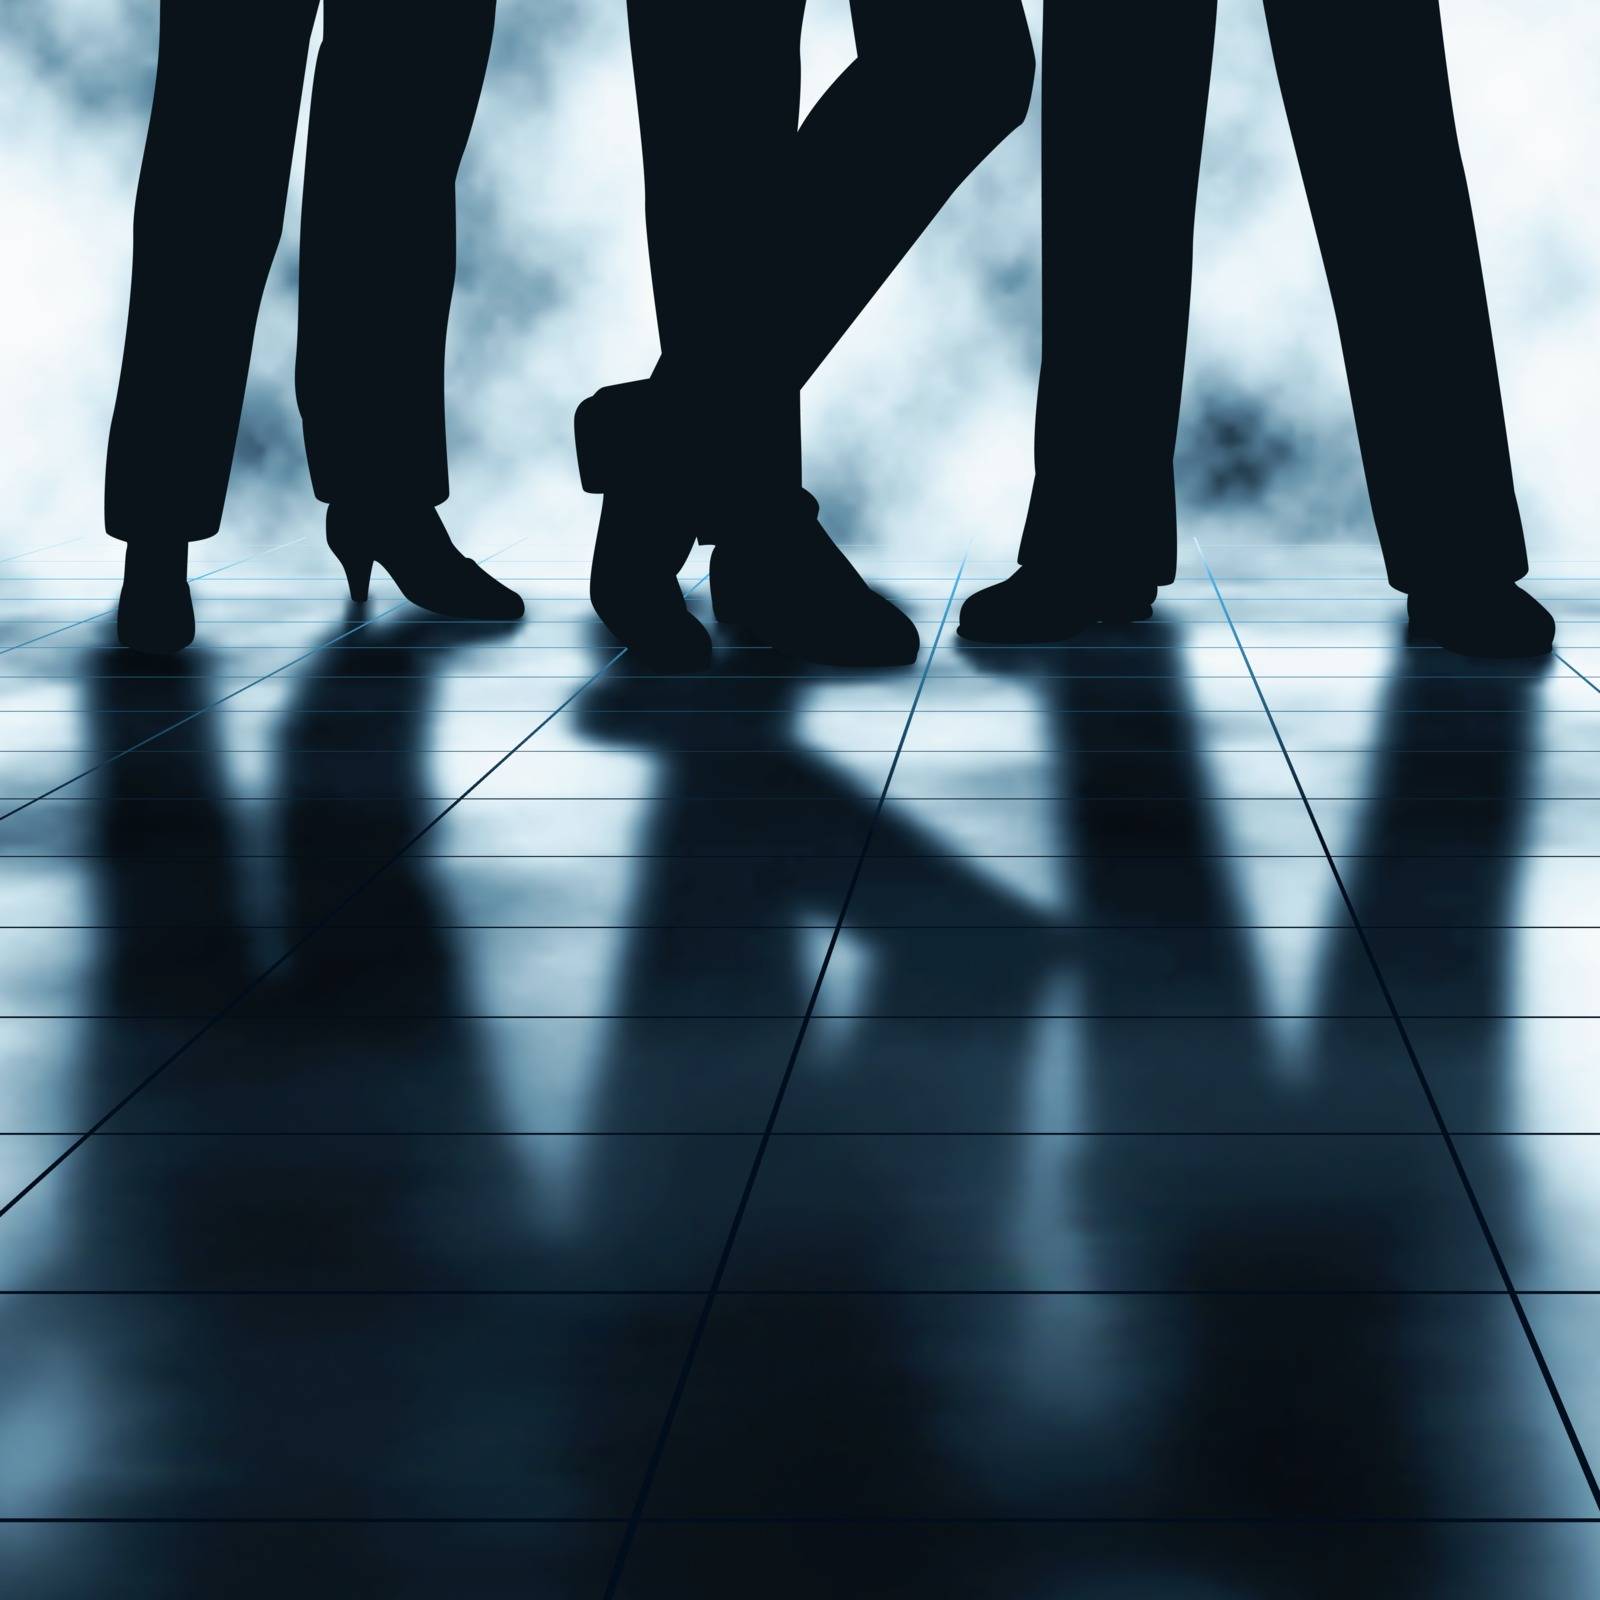 Editable vector illustration of the legs and reflections of three businesspeople made using a gradient mesh